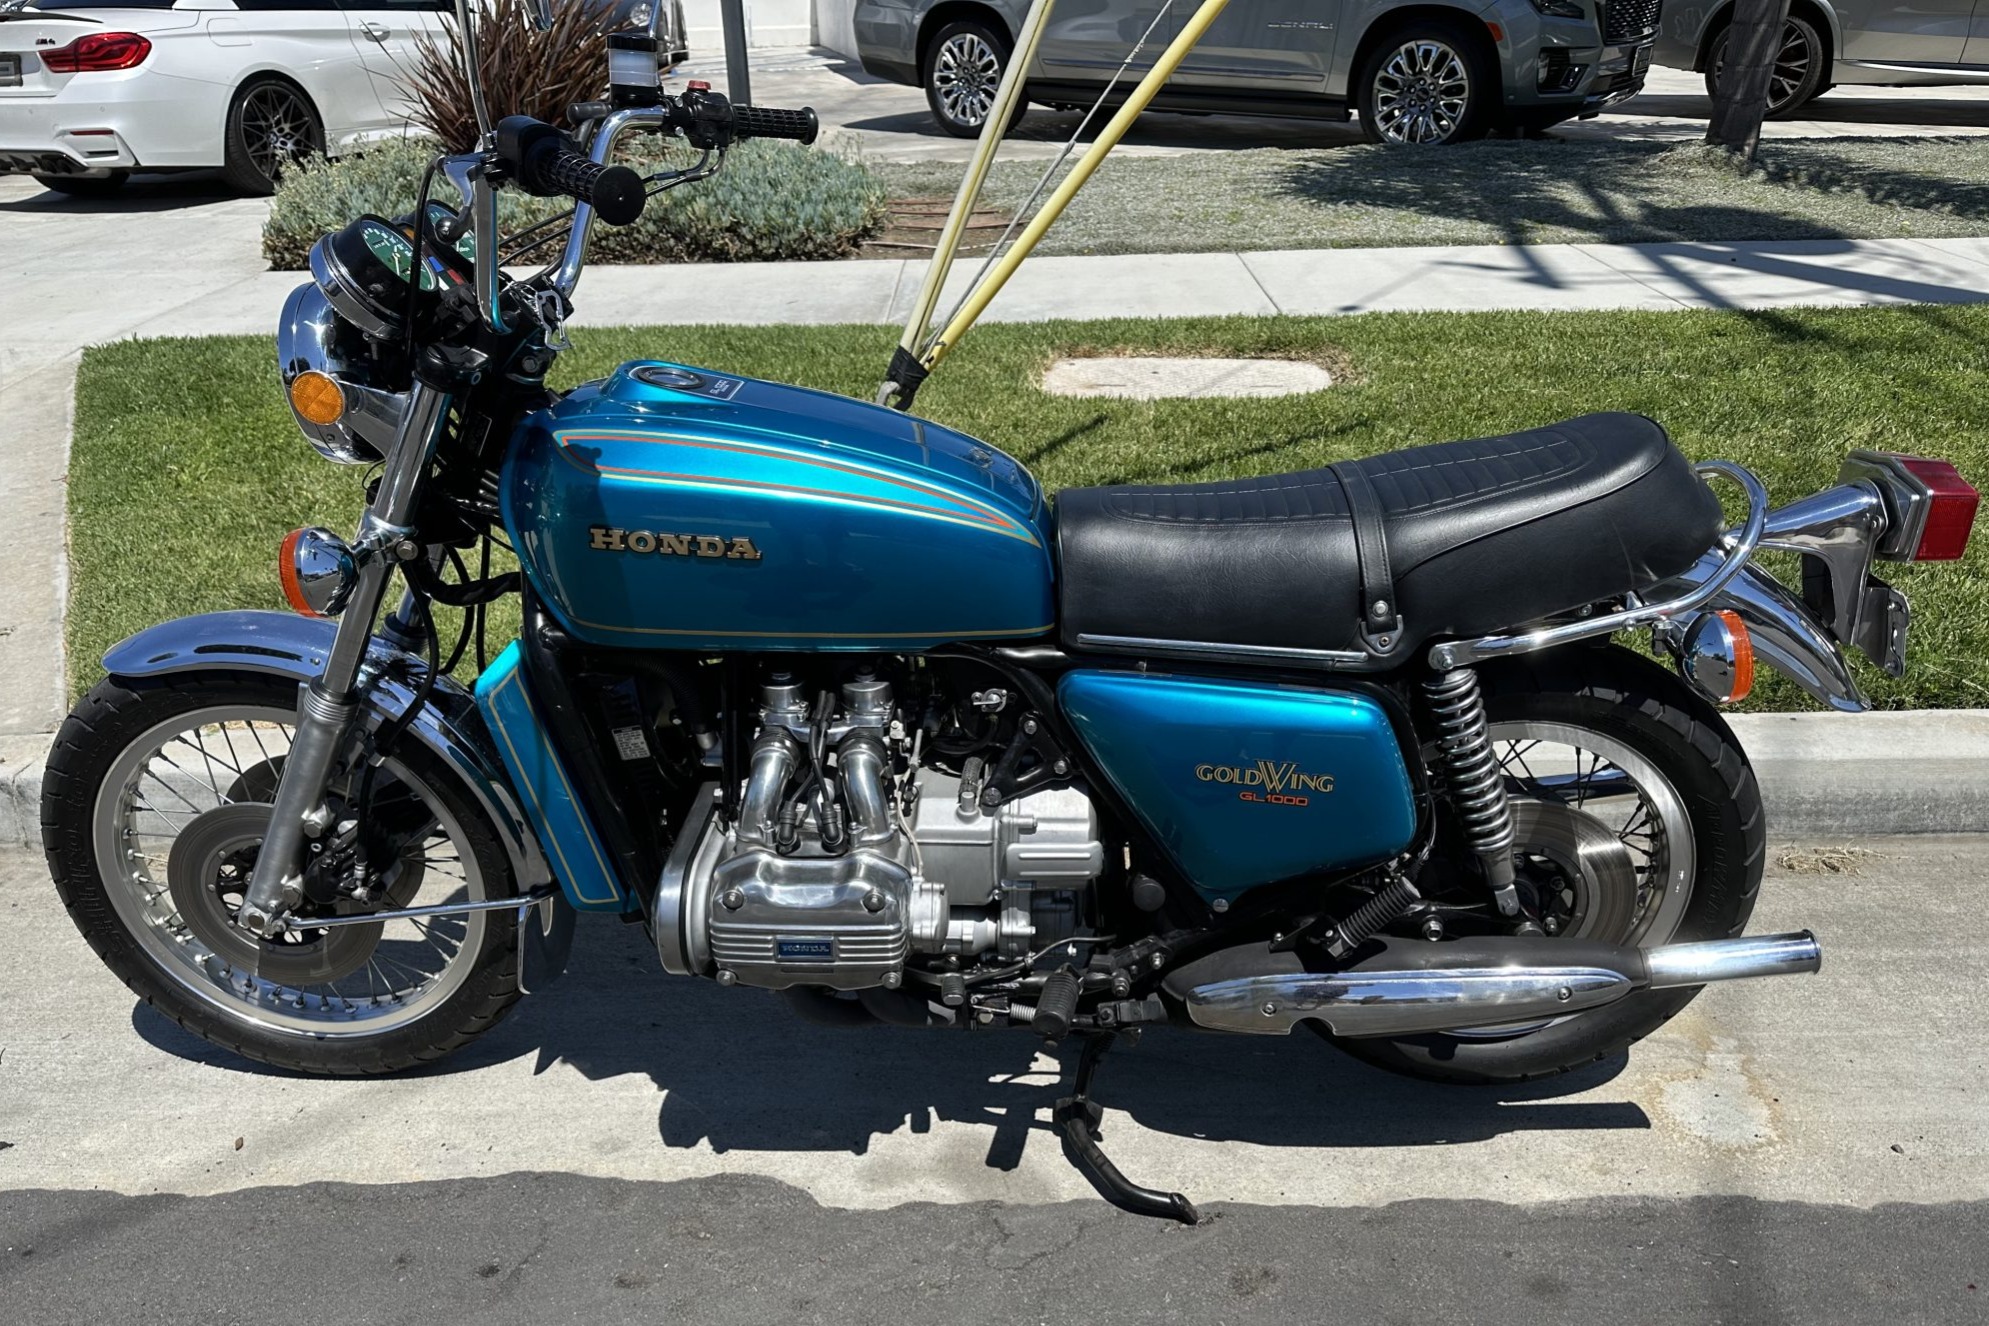 Used 1975 Honda GL1000 Gold Wing Review